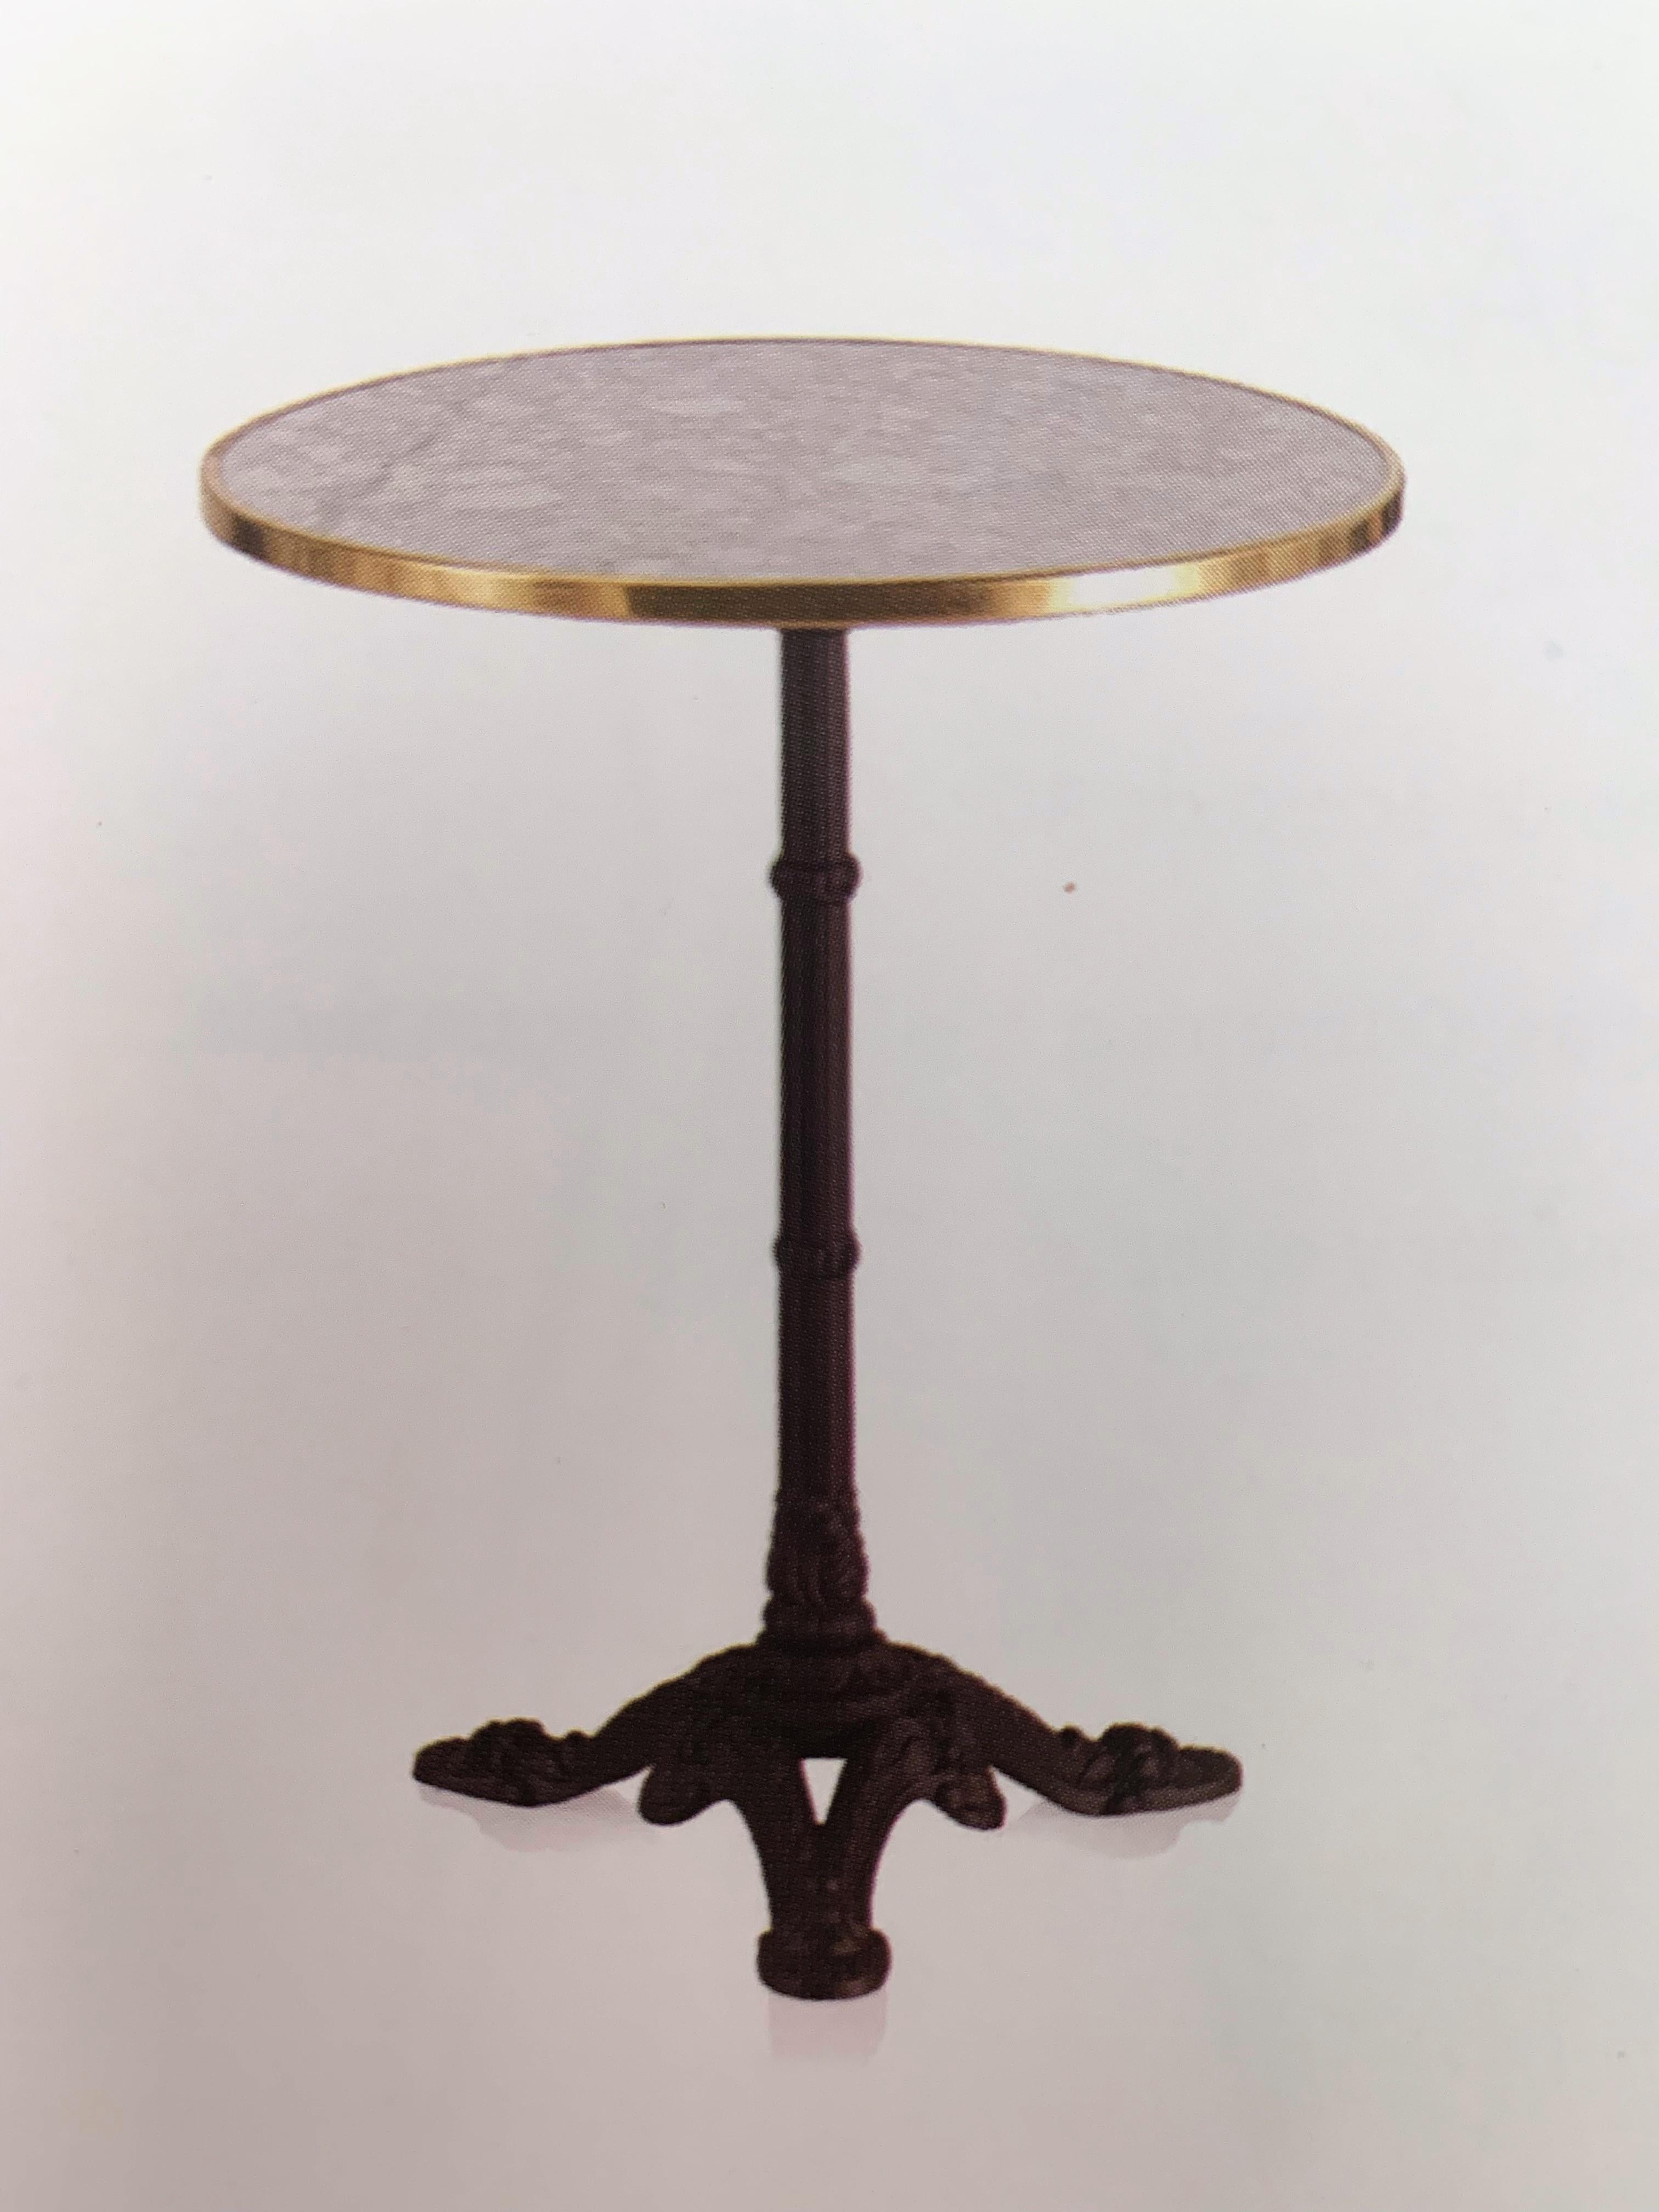 Contemporary Bistro High Table in Wrought Iron with Marble and Brass Top, Indoor and Outdoor